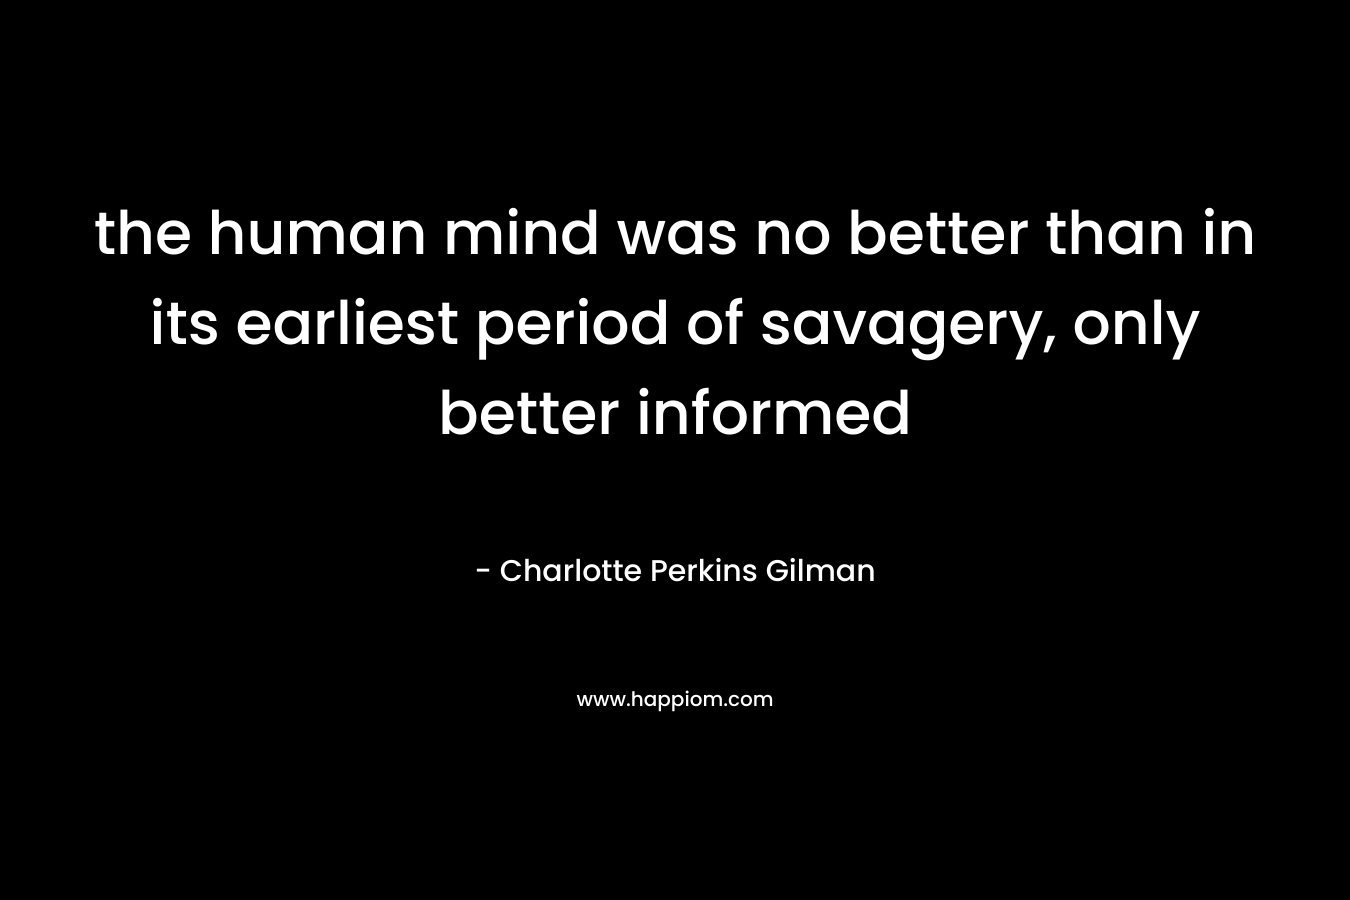 the human mind was no better than in its earliest period of savagery, only better informed